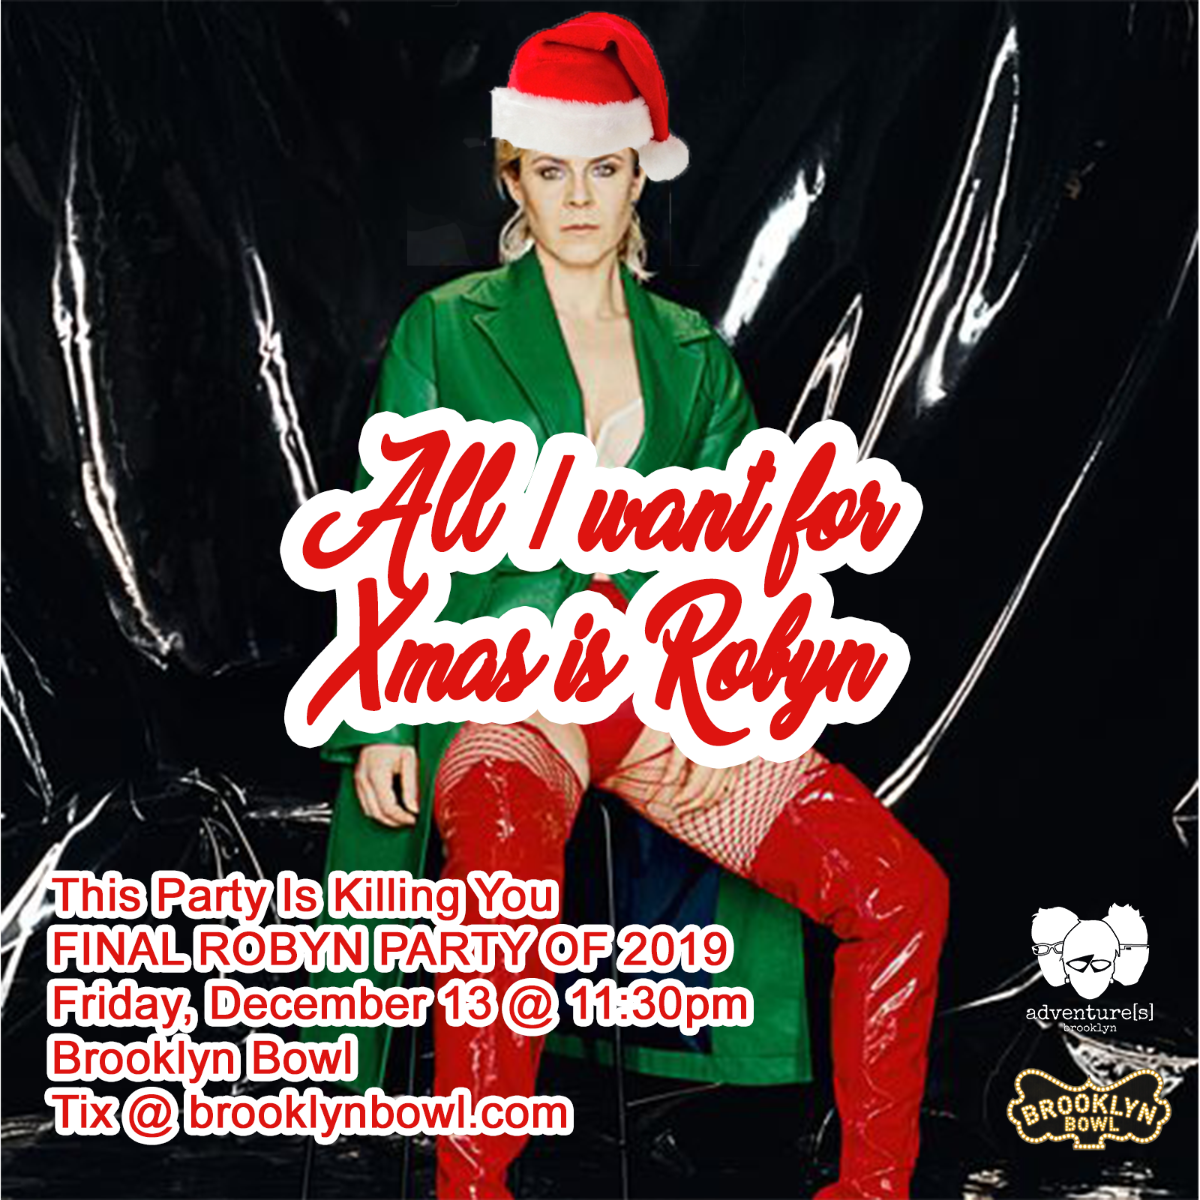 This Party is Killing You: All I Want for Xmas Is Robyn! Edition